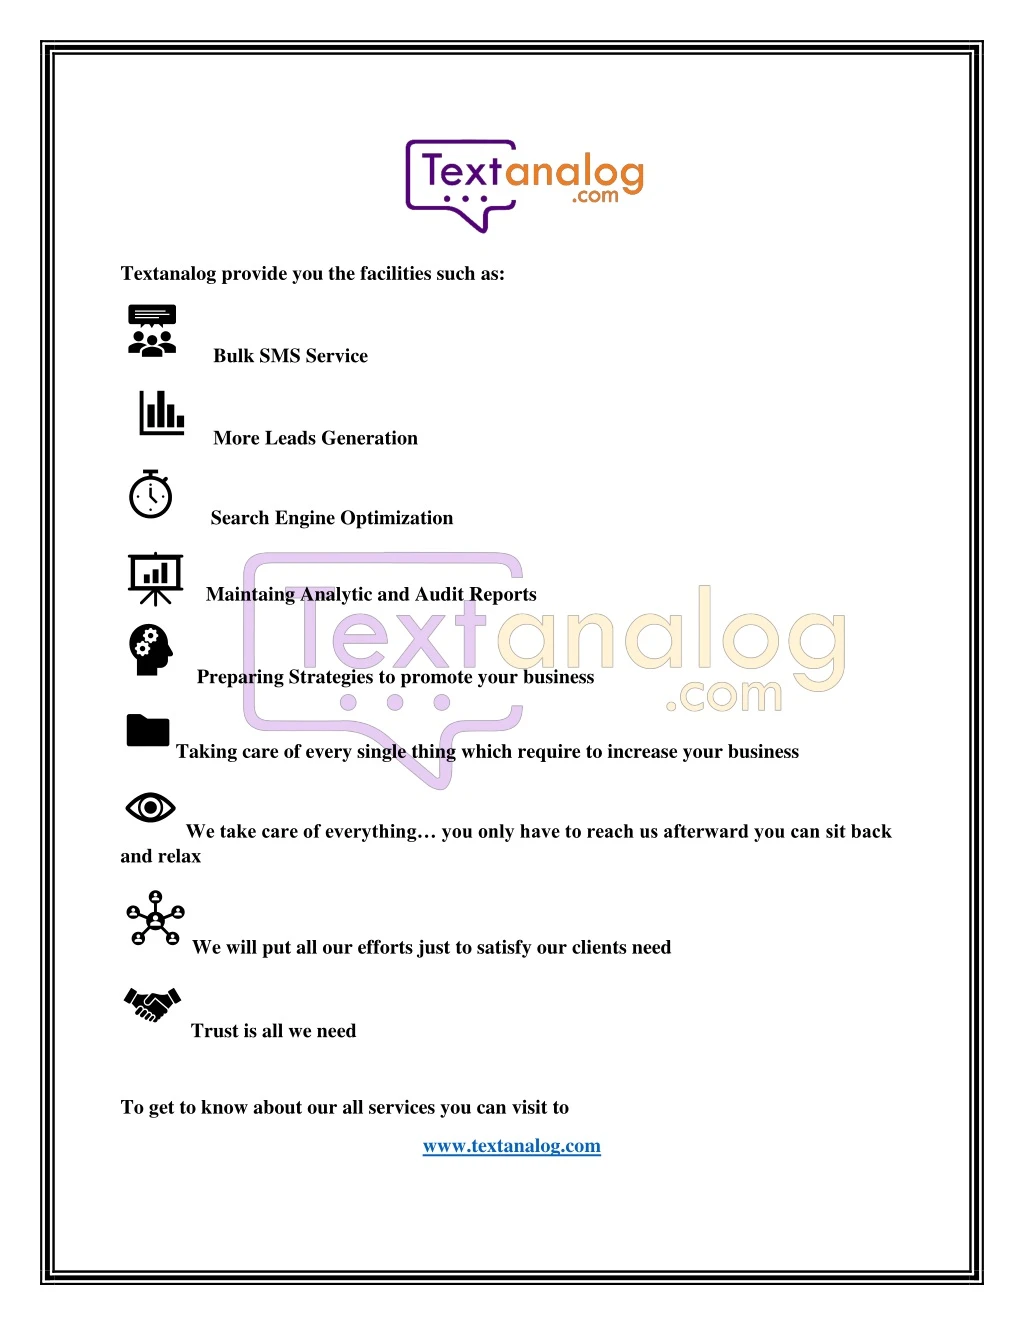 textanalog provide you the facilities such as